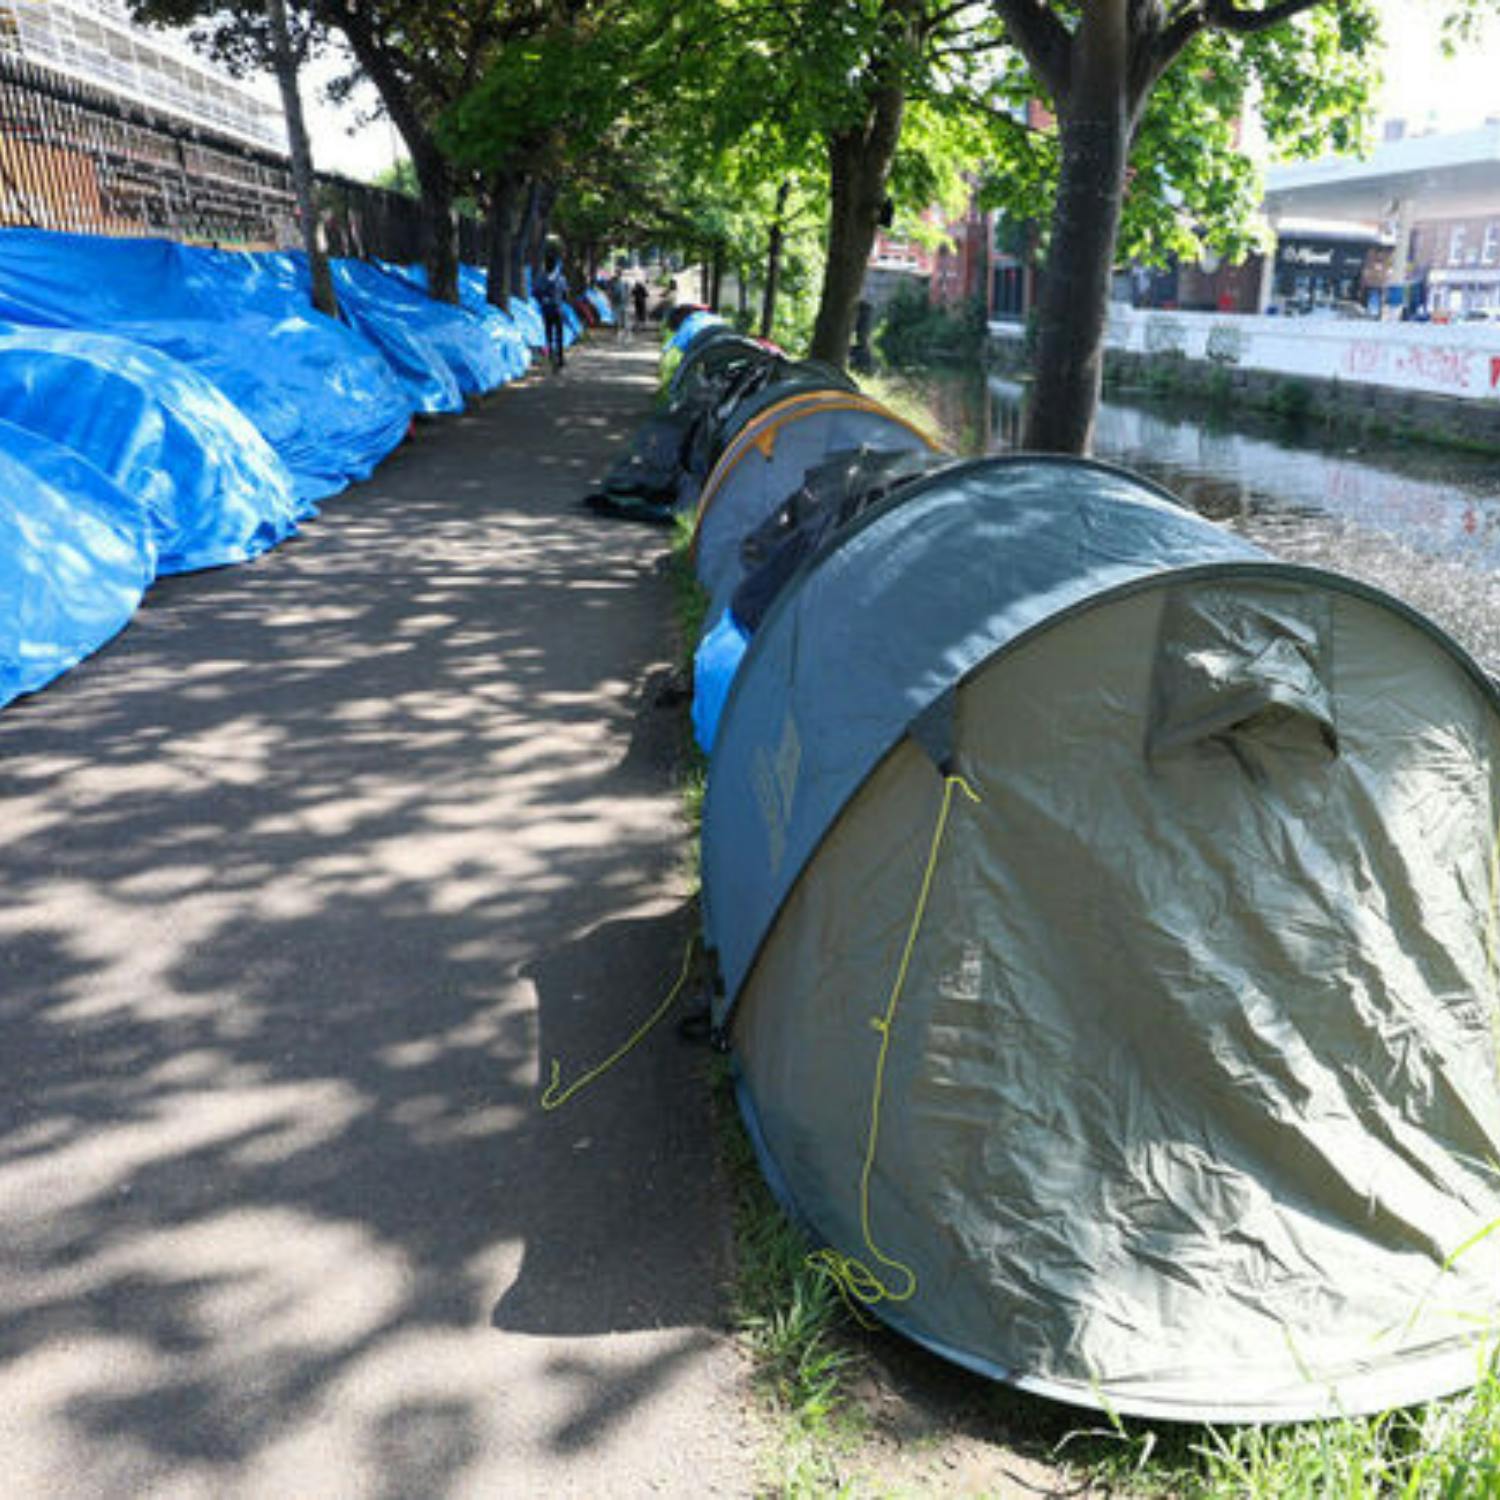 Government to provide tents at Thornton Hall in 'very near future'